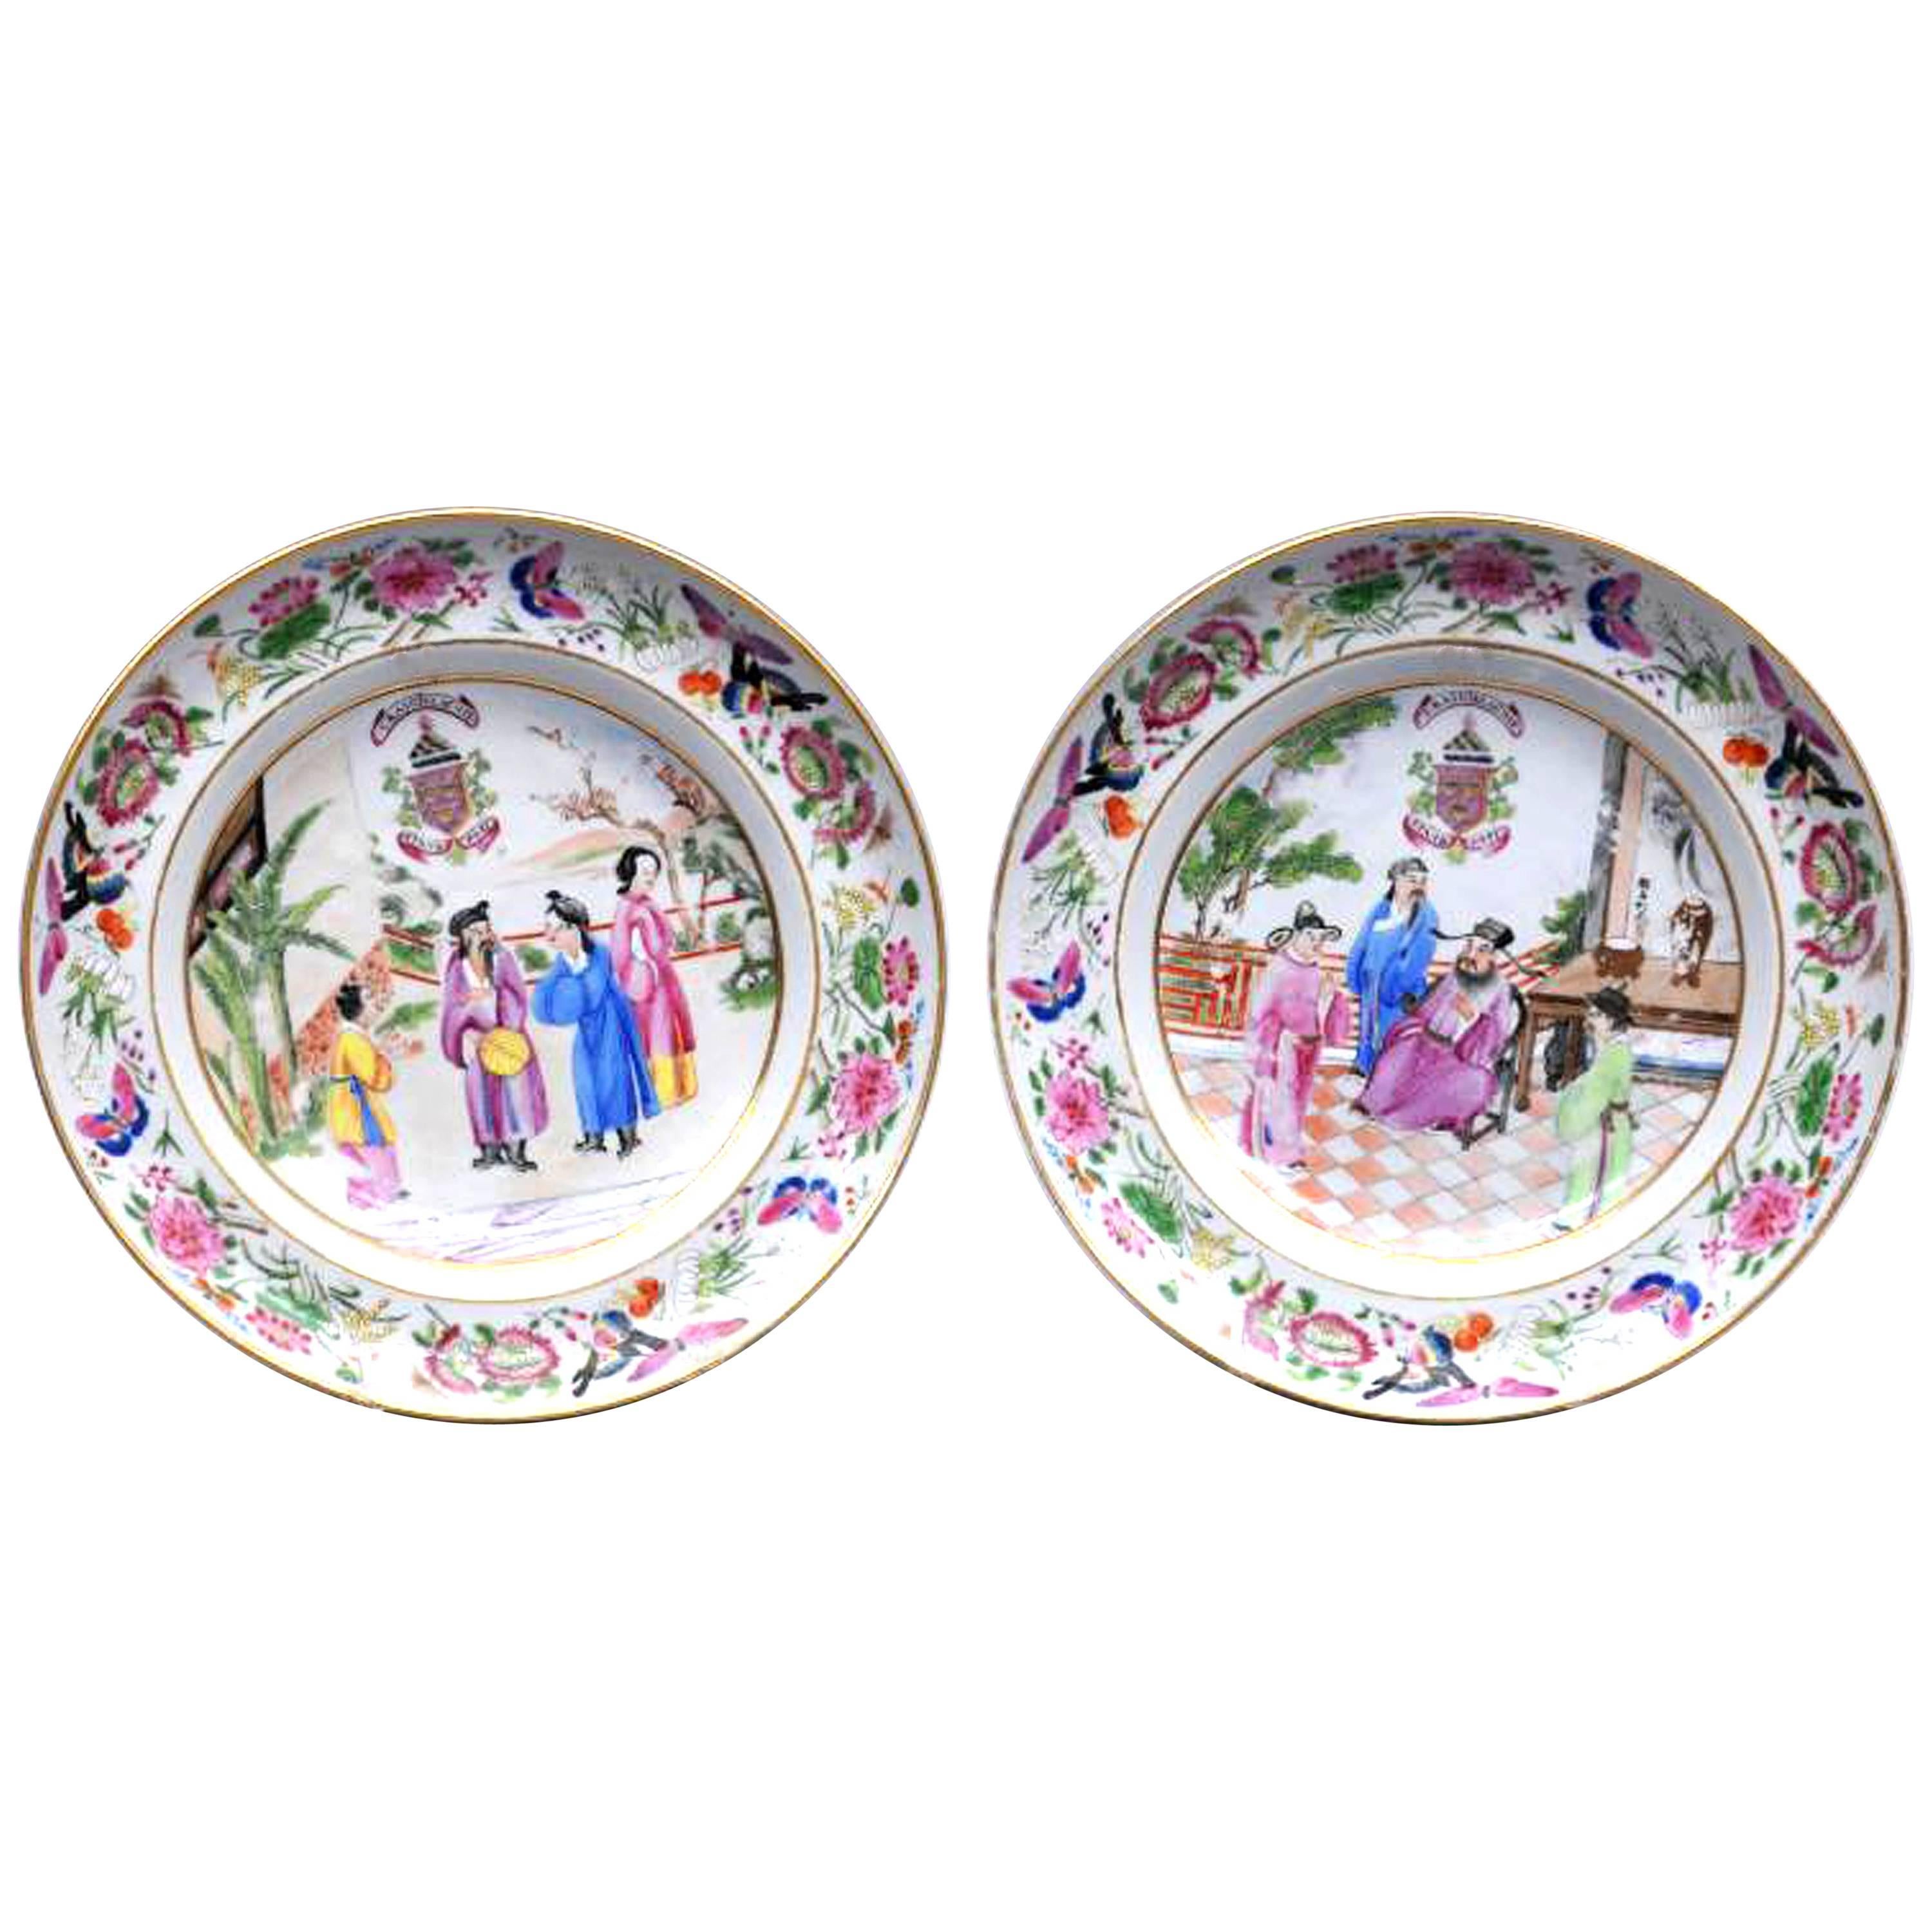 Chinese Export Armorial Porcelain Soup Plates, Arms of Grant, circa 1810